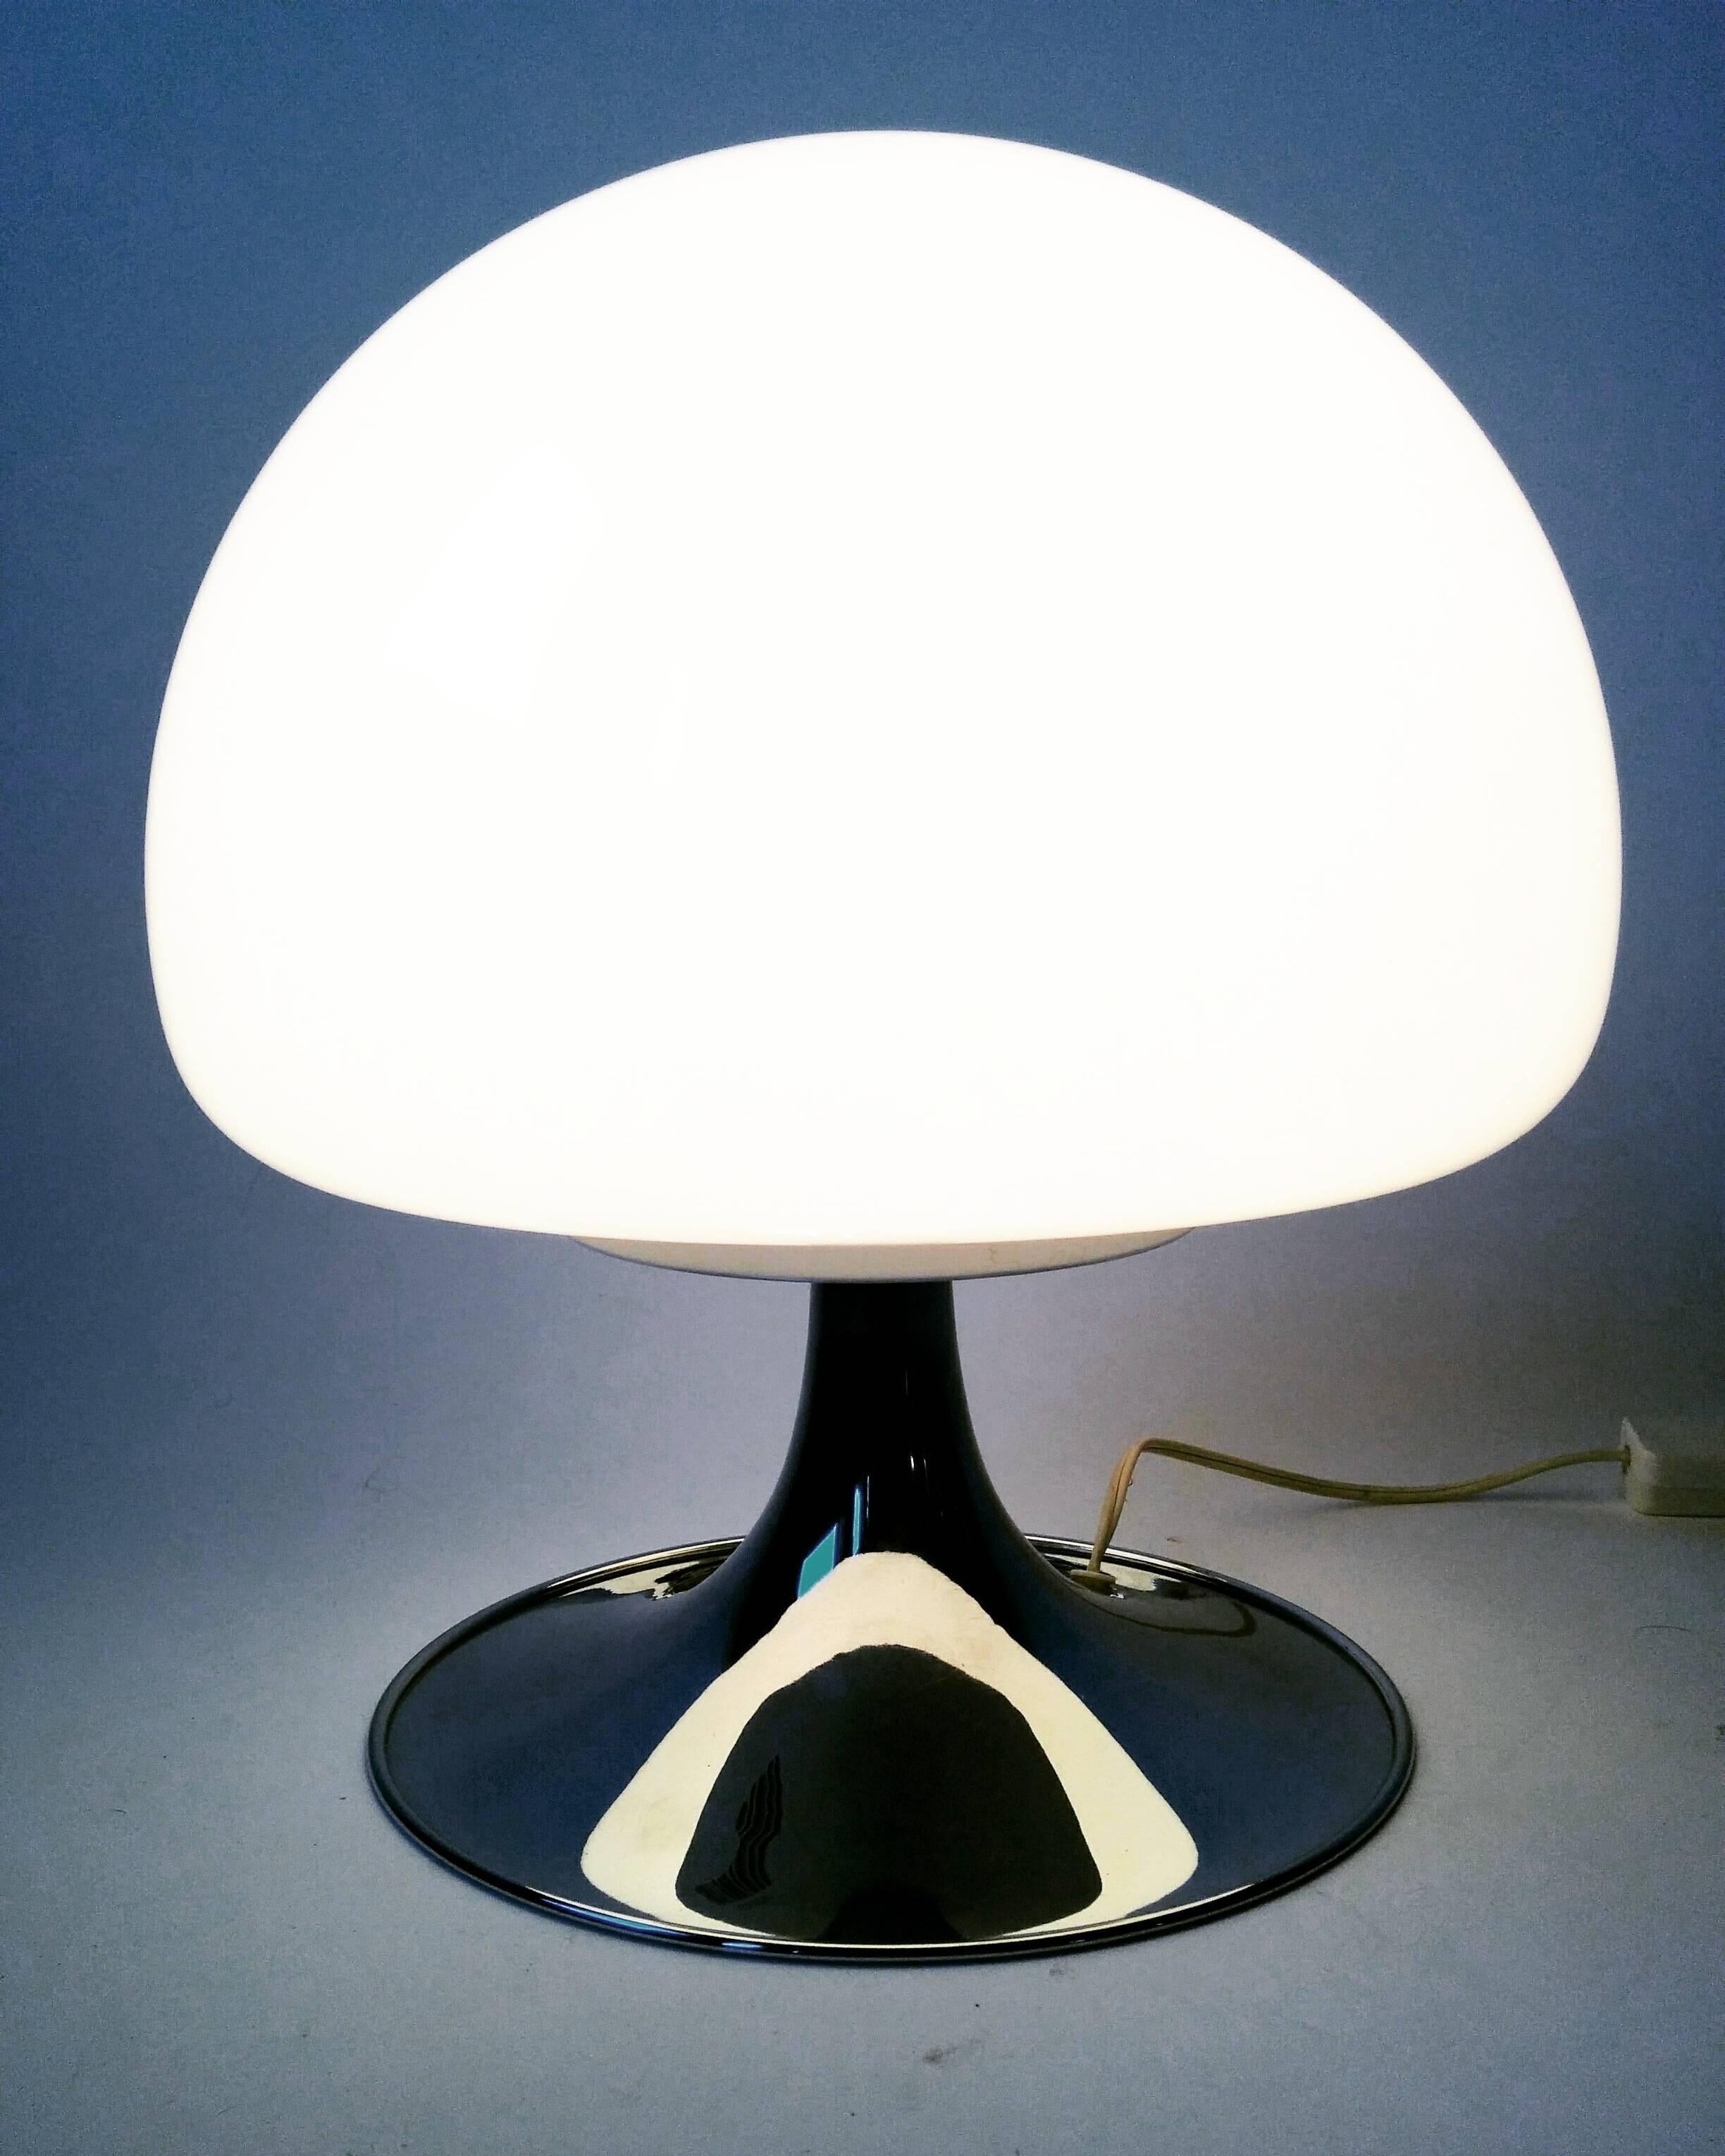 Opale mushroom shaped glass shade that produce a nice warm glow. 

Trumpet shaped steel chrome base. 

One E26 North American socket rated at 60 watts. 

Switch on cord.

Measures: 13 inches high by 12 inches wide.